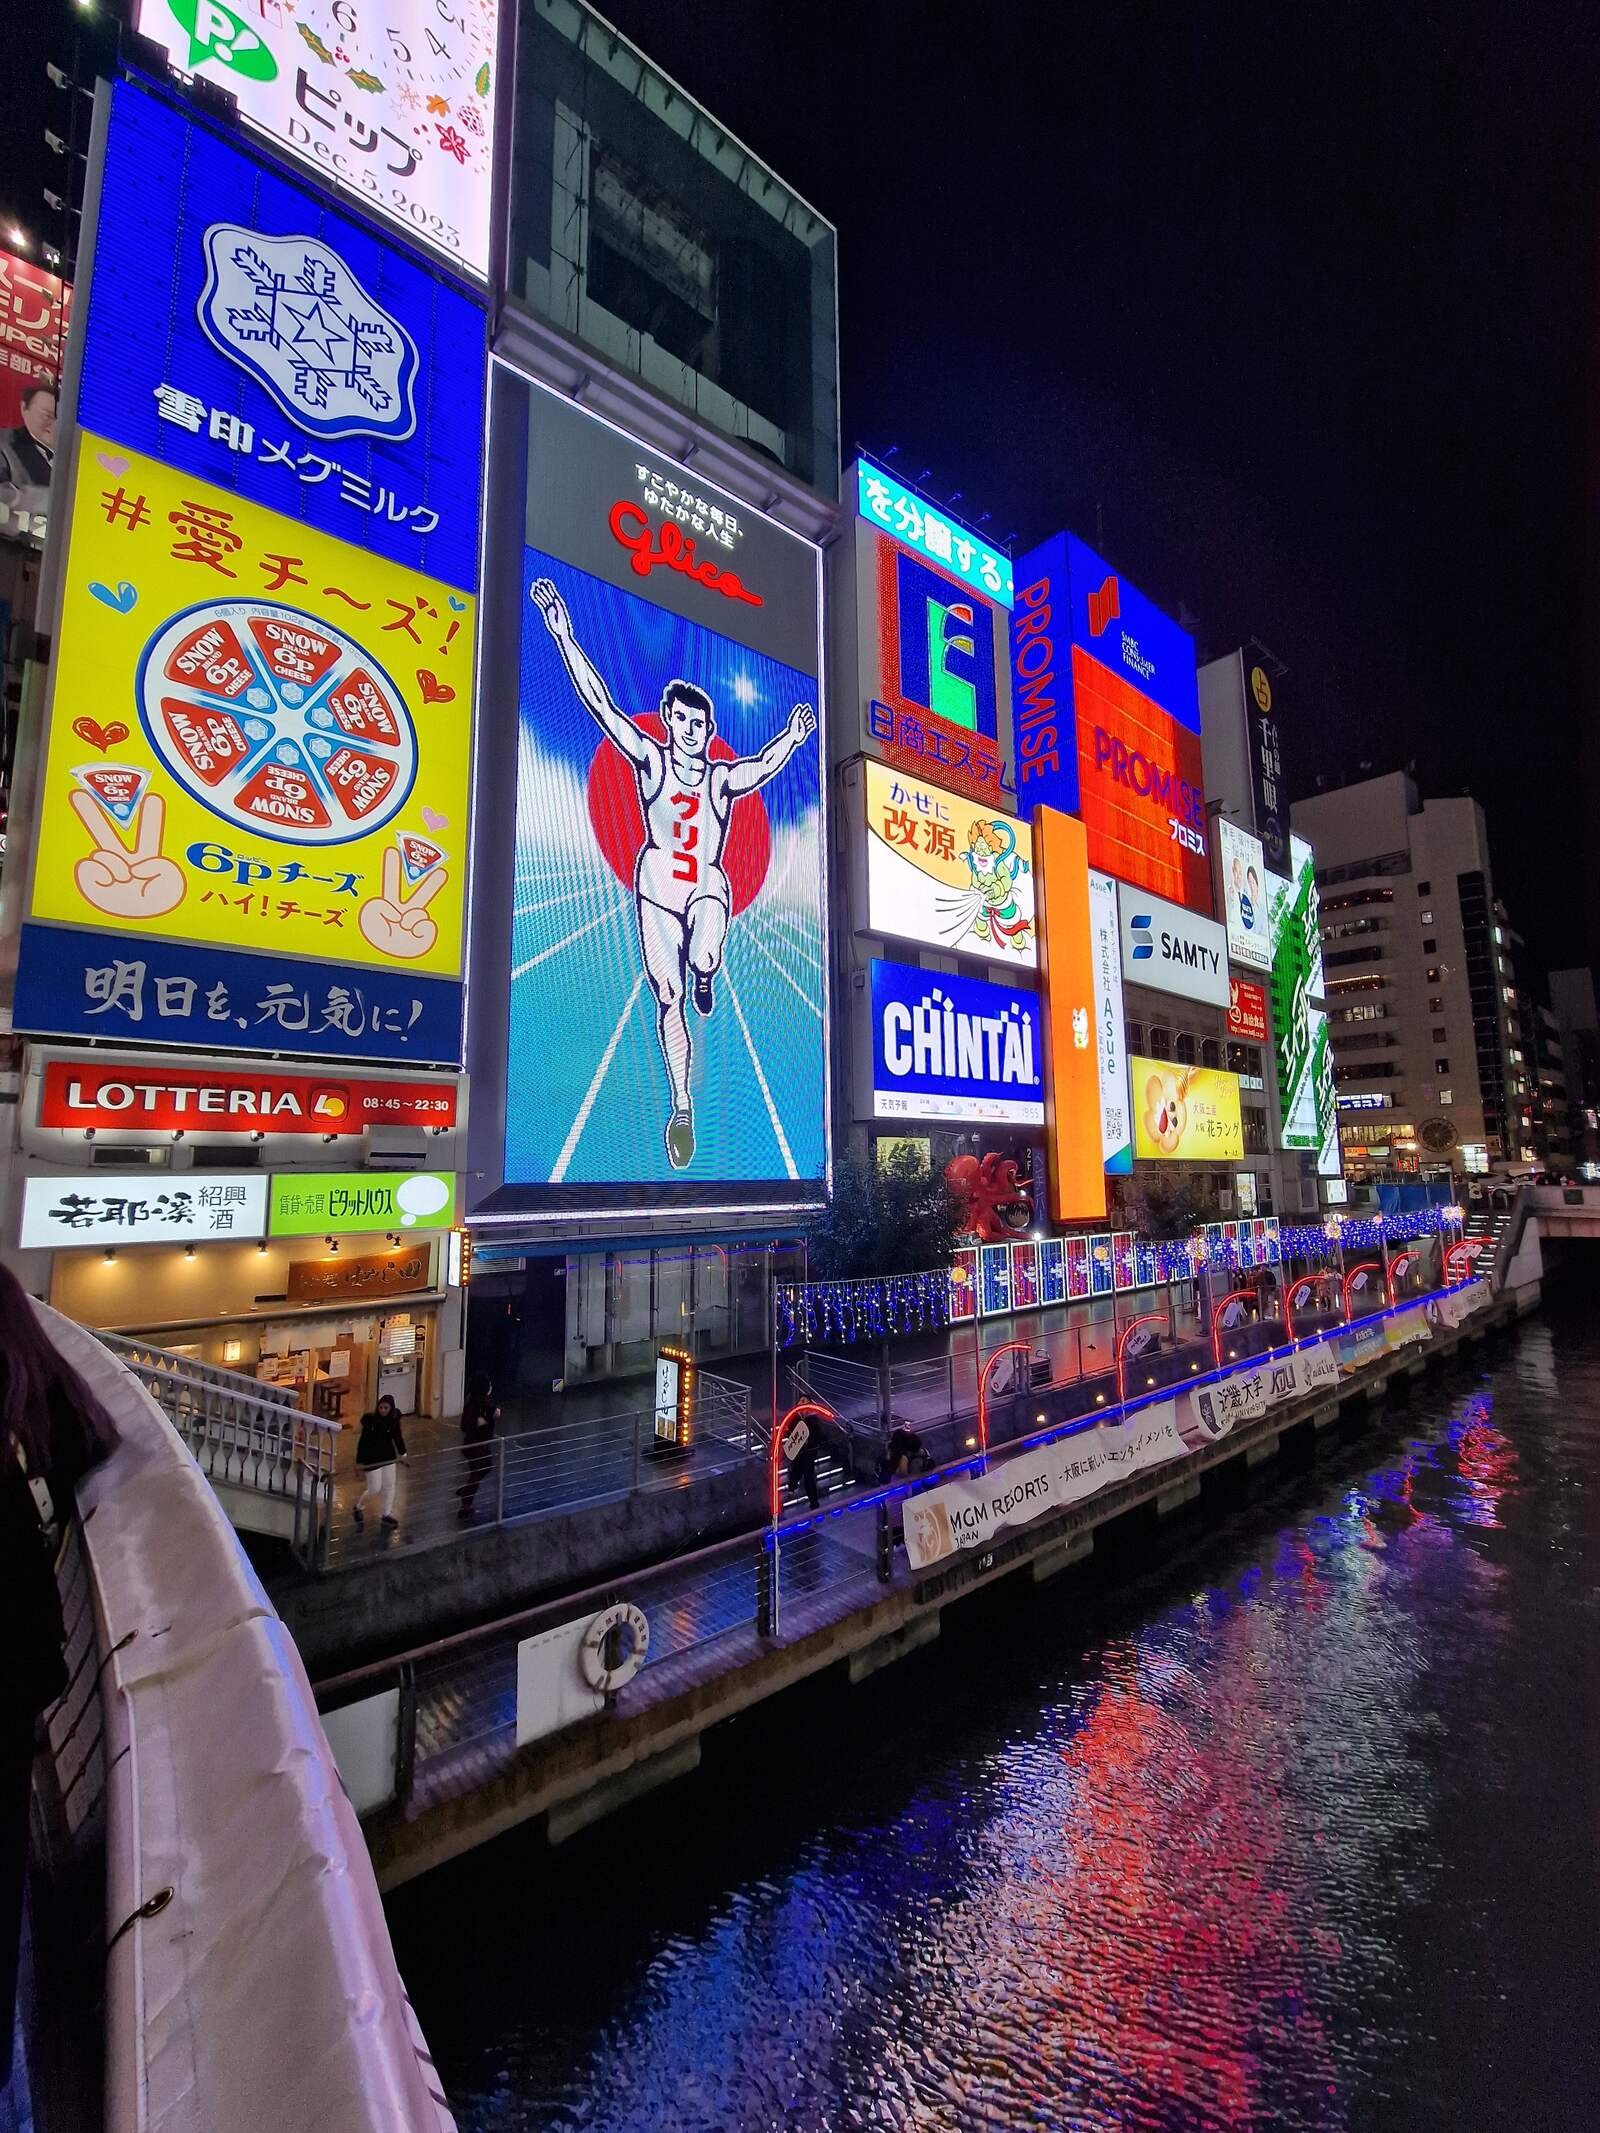 Nighttime with Lots of colourful adverts and billboards lit up on the side of buildings along a river including a large portrait of a running man with his arms in the air - this is the osaka glico running man sign